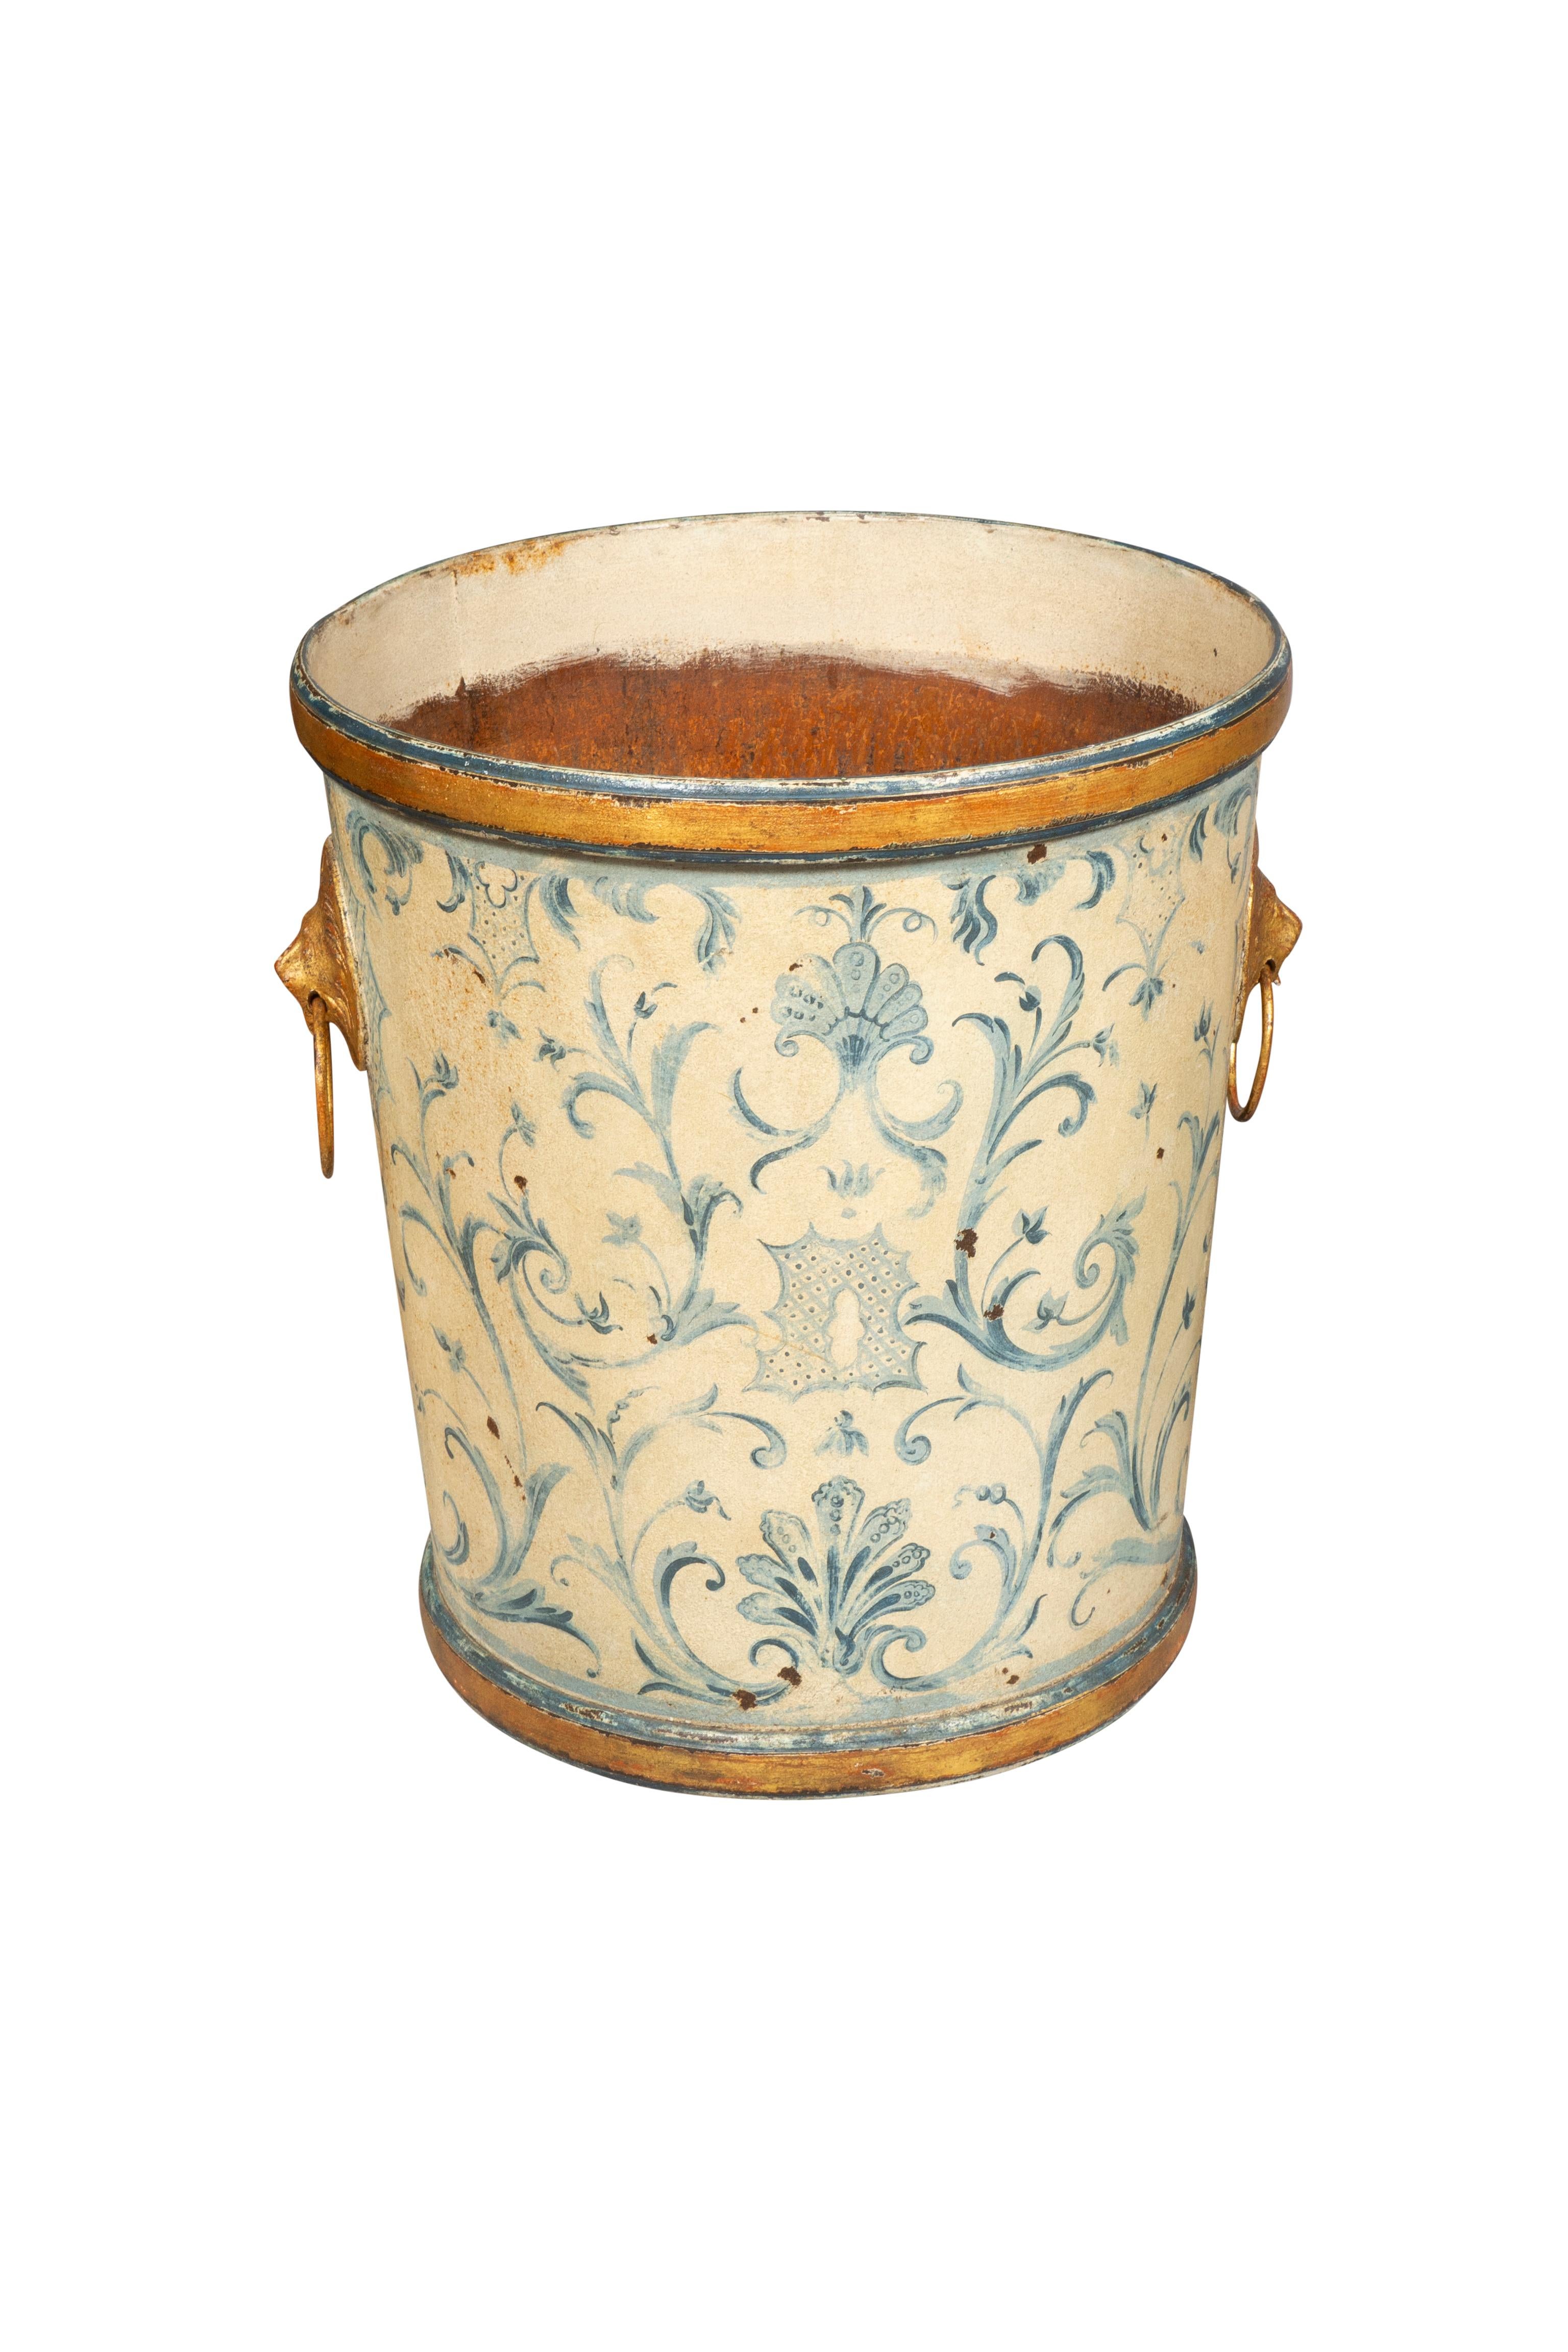 Cylindrical done in the style of the French enameled cast iron garden urns. Gilt lions head ring handles.